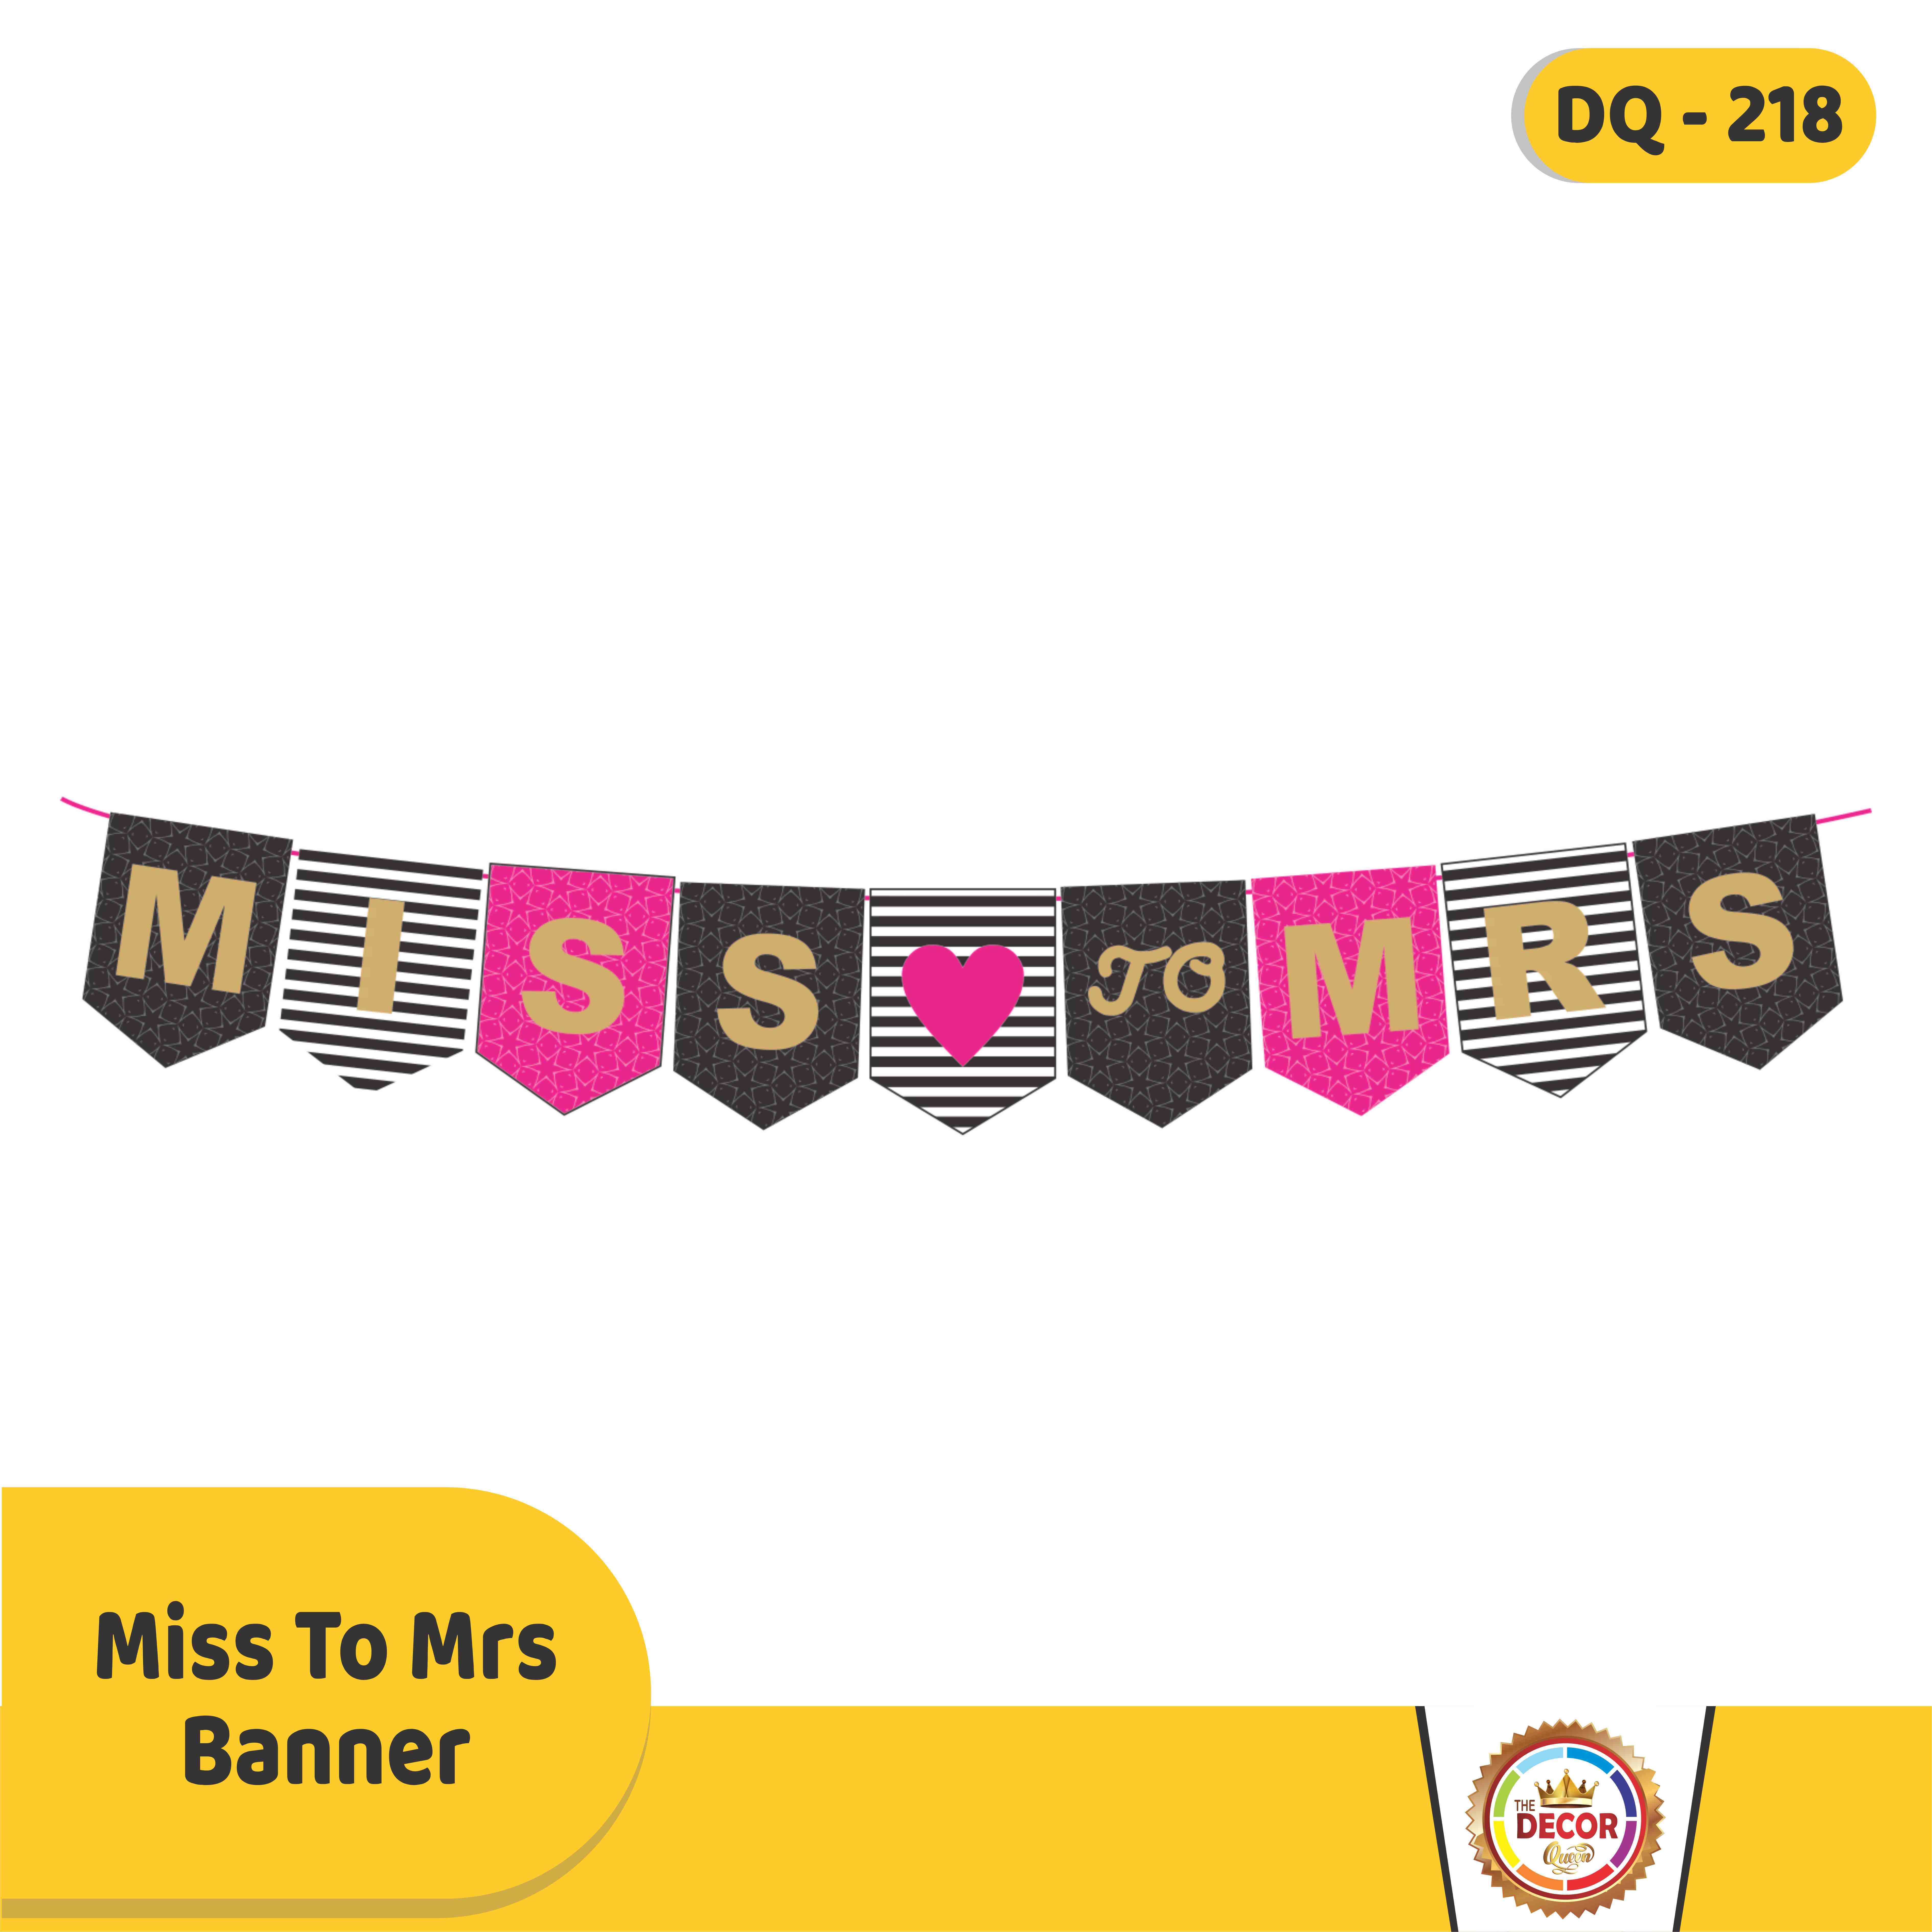 MISS TO MRS BANNER|Banners|Other Banners